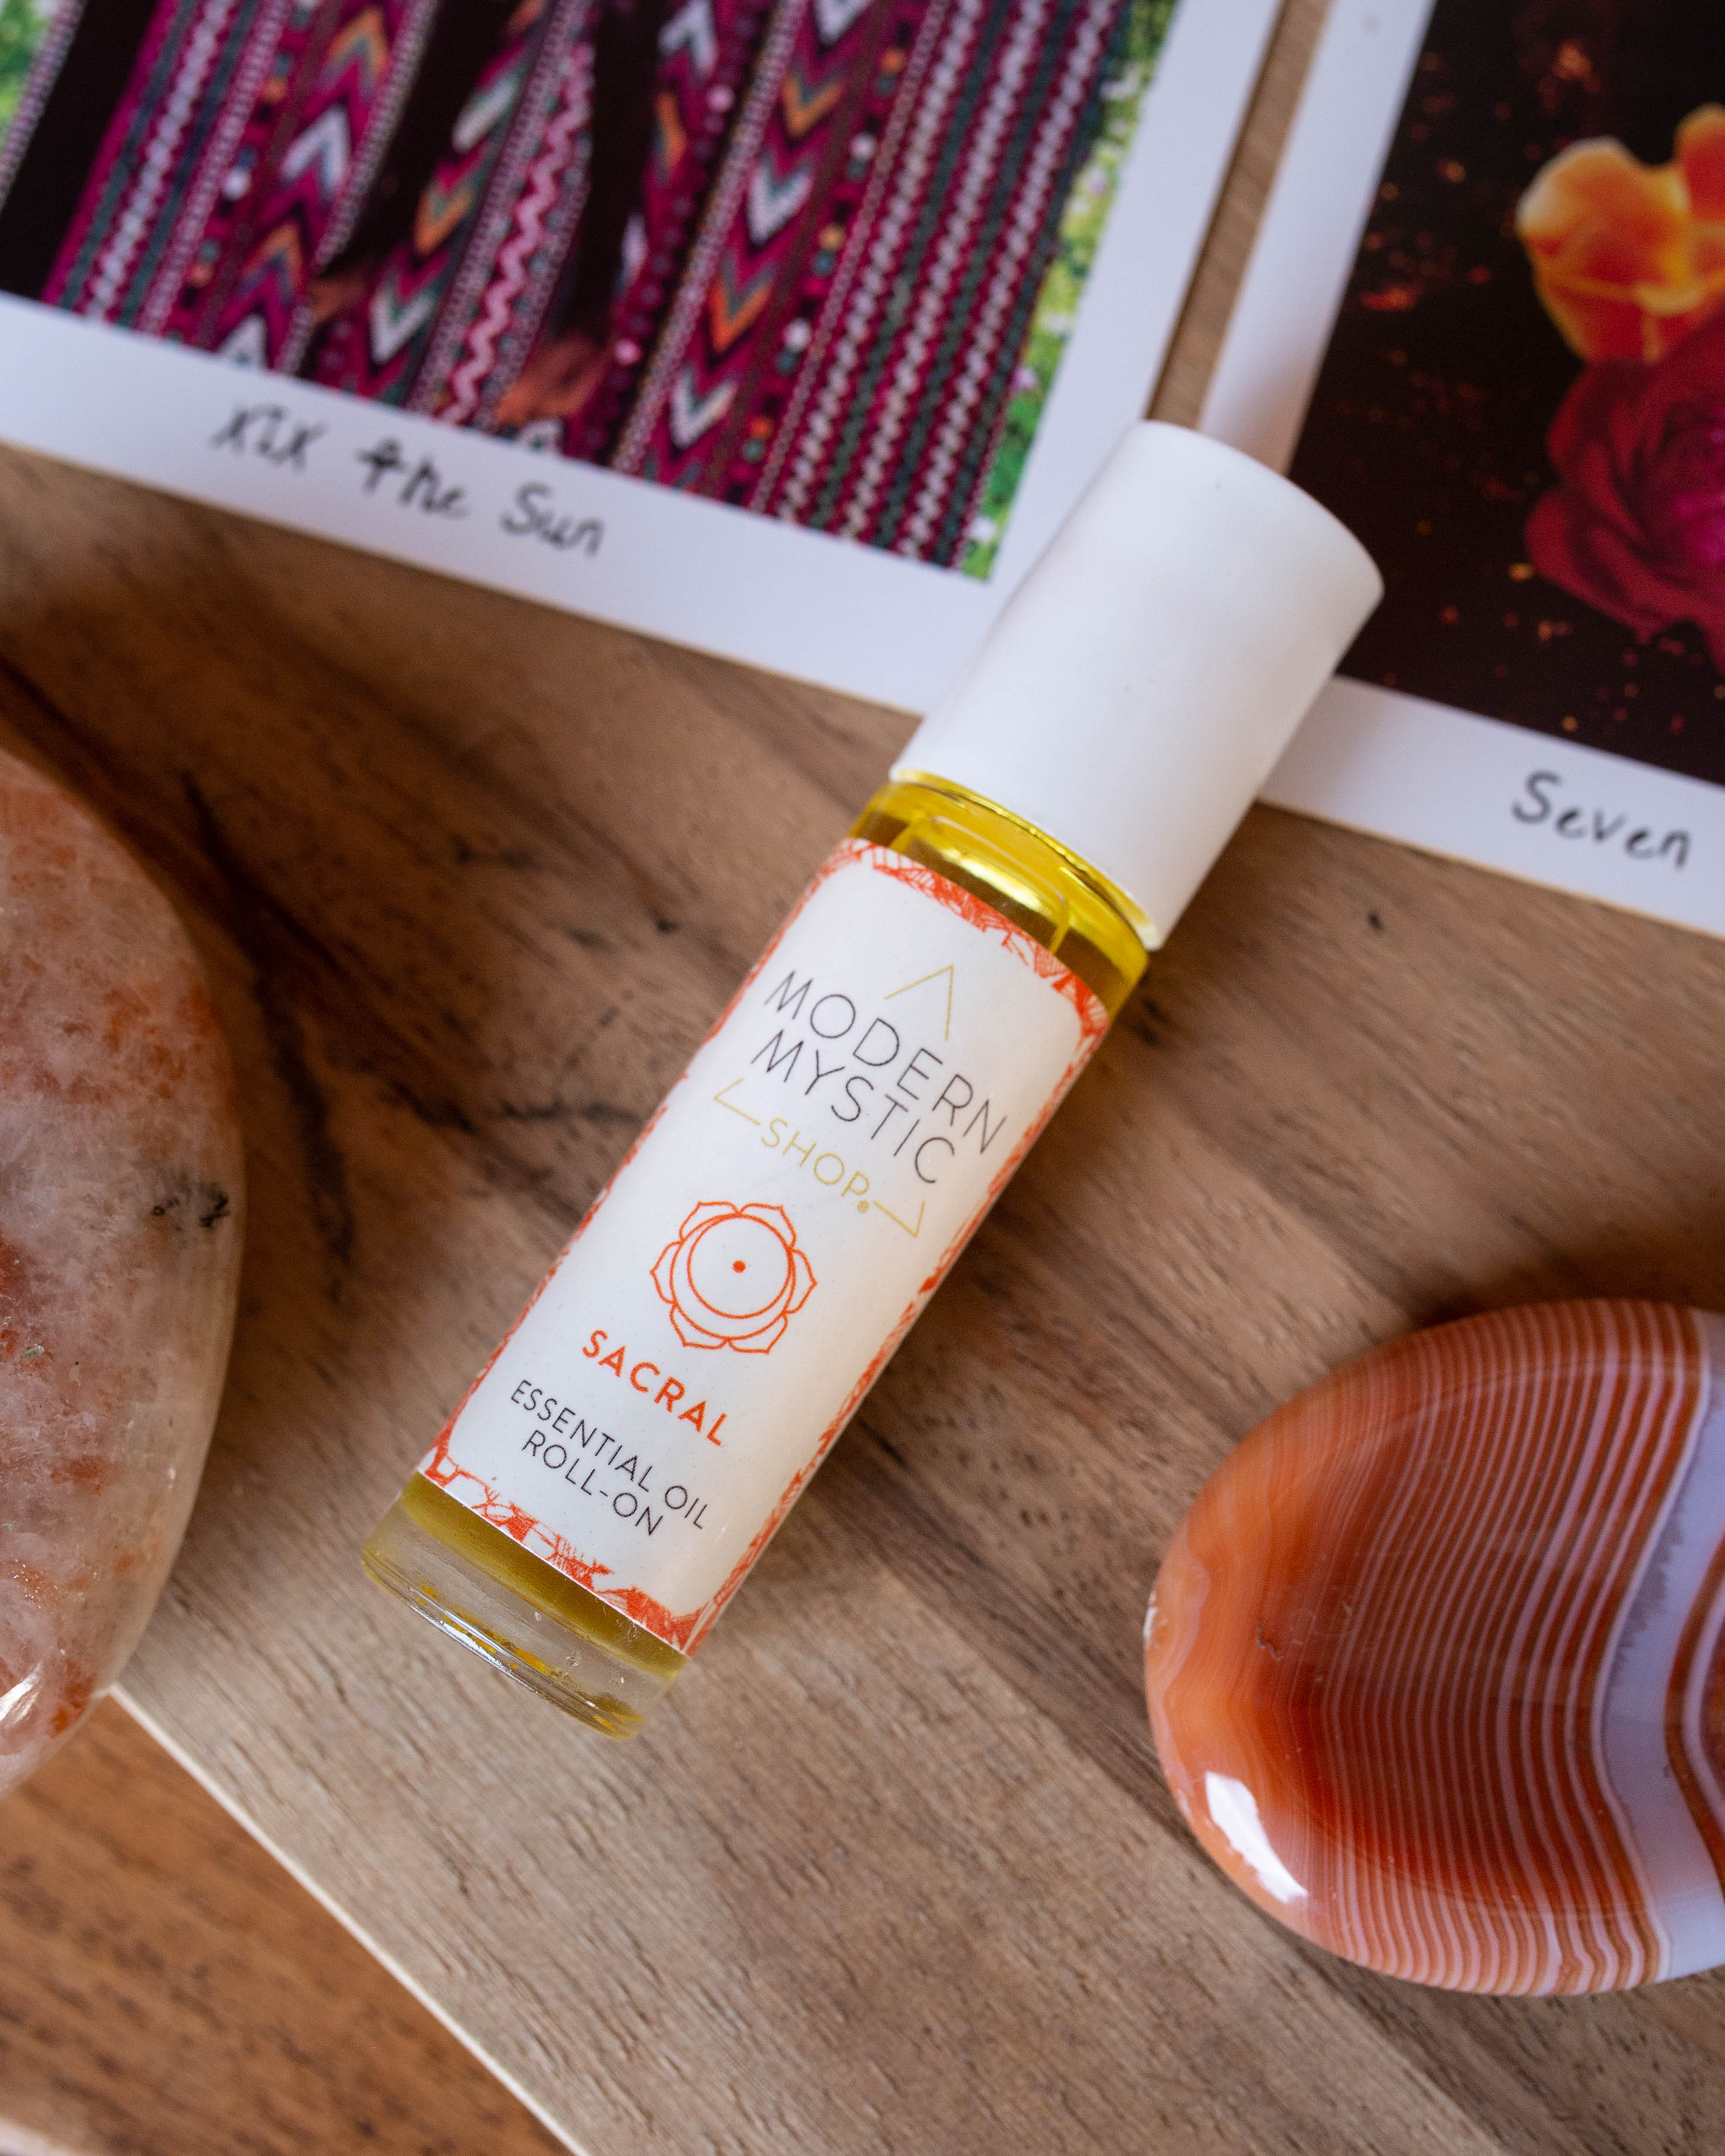 Sacral Chakra Essential Oil Roll On